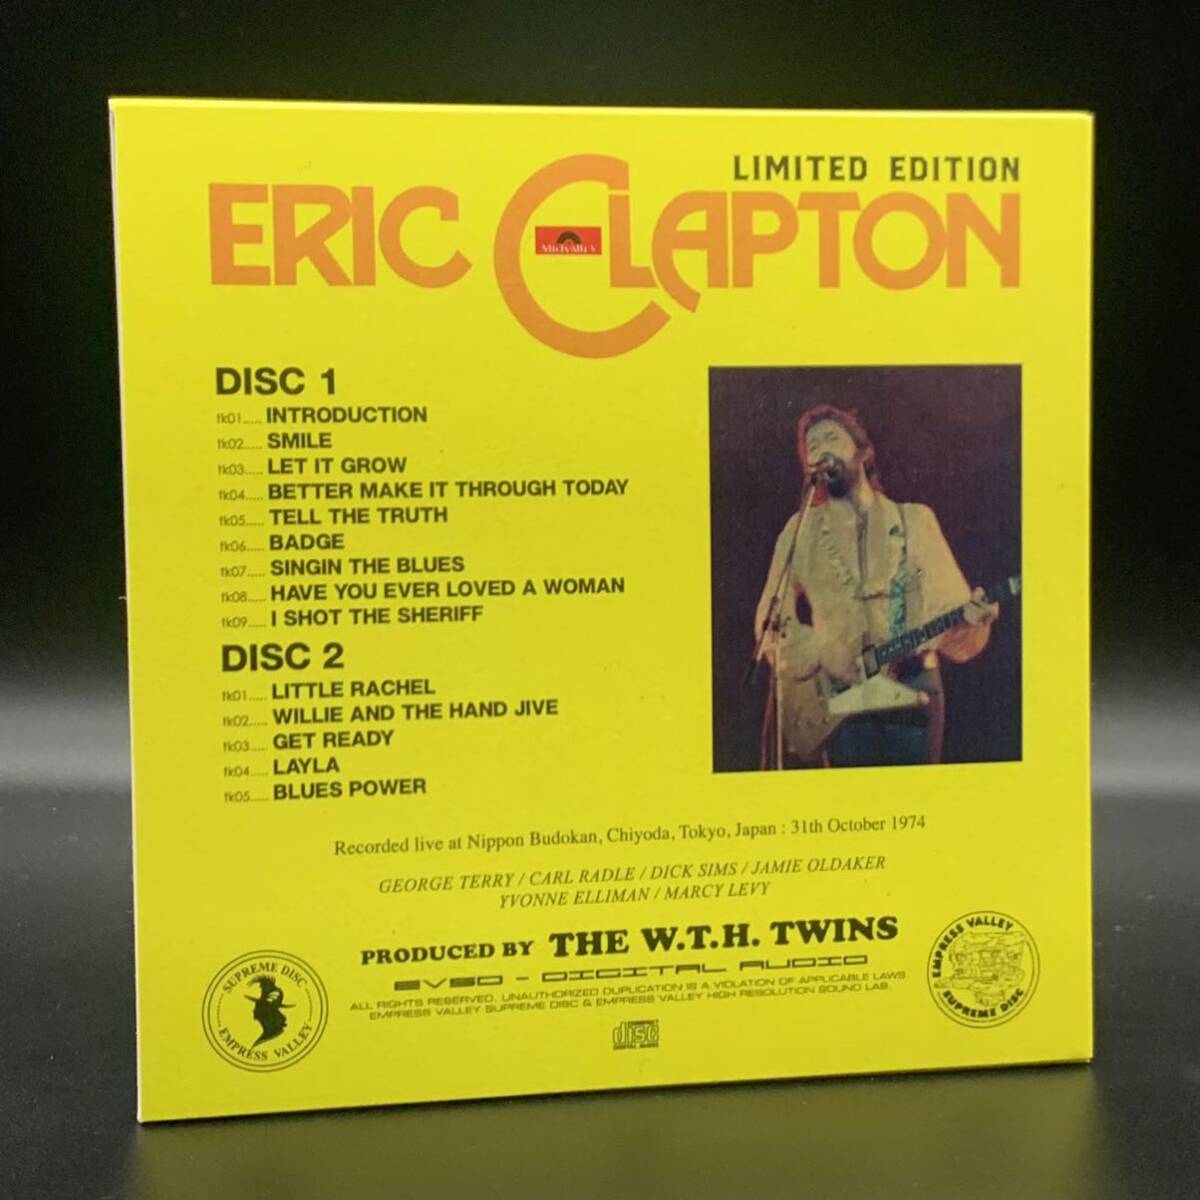 ERIC CLAPTON / TROPICAL SOUND SHOWER「亜熱帯武道館」(6CD BOX with Booklet) 初来日武道館3公演を全て初登場音源で収録した凄いやつ！の画像4